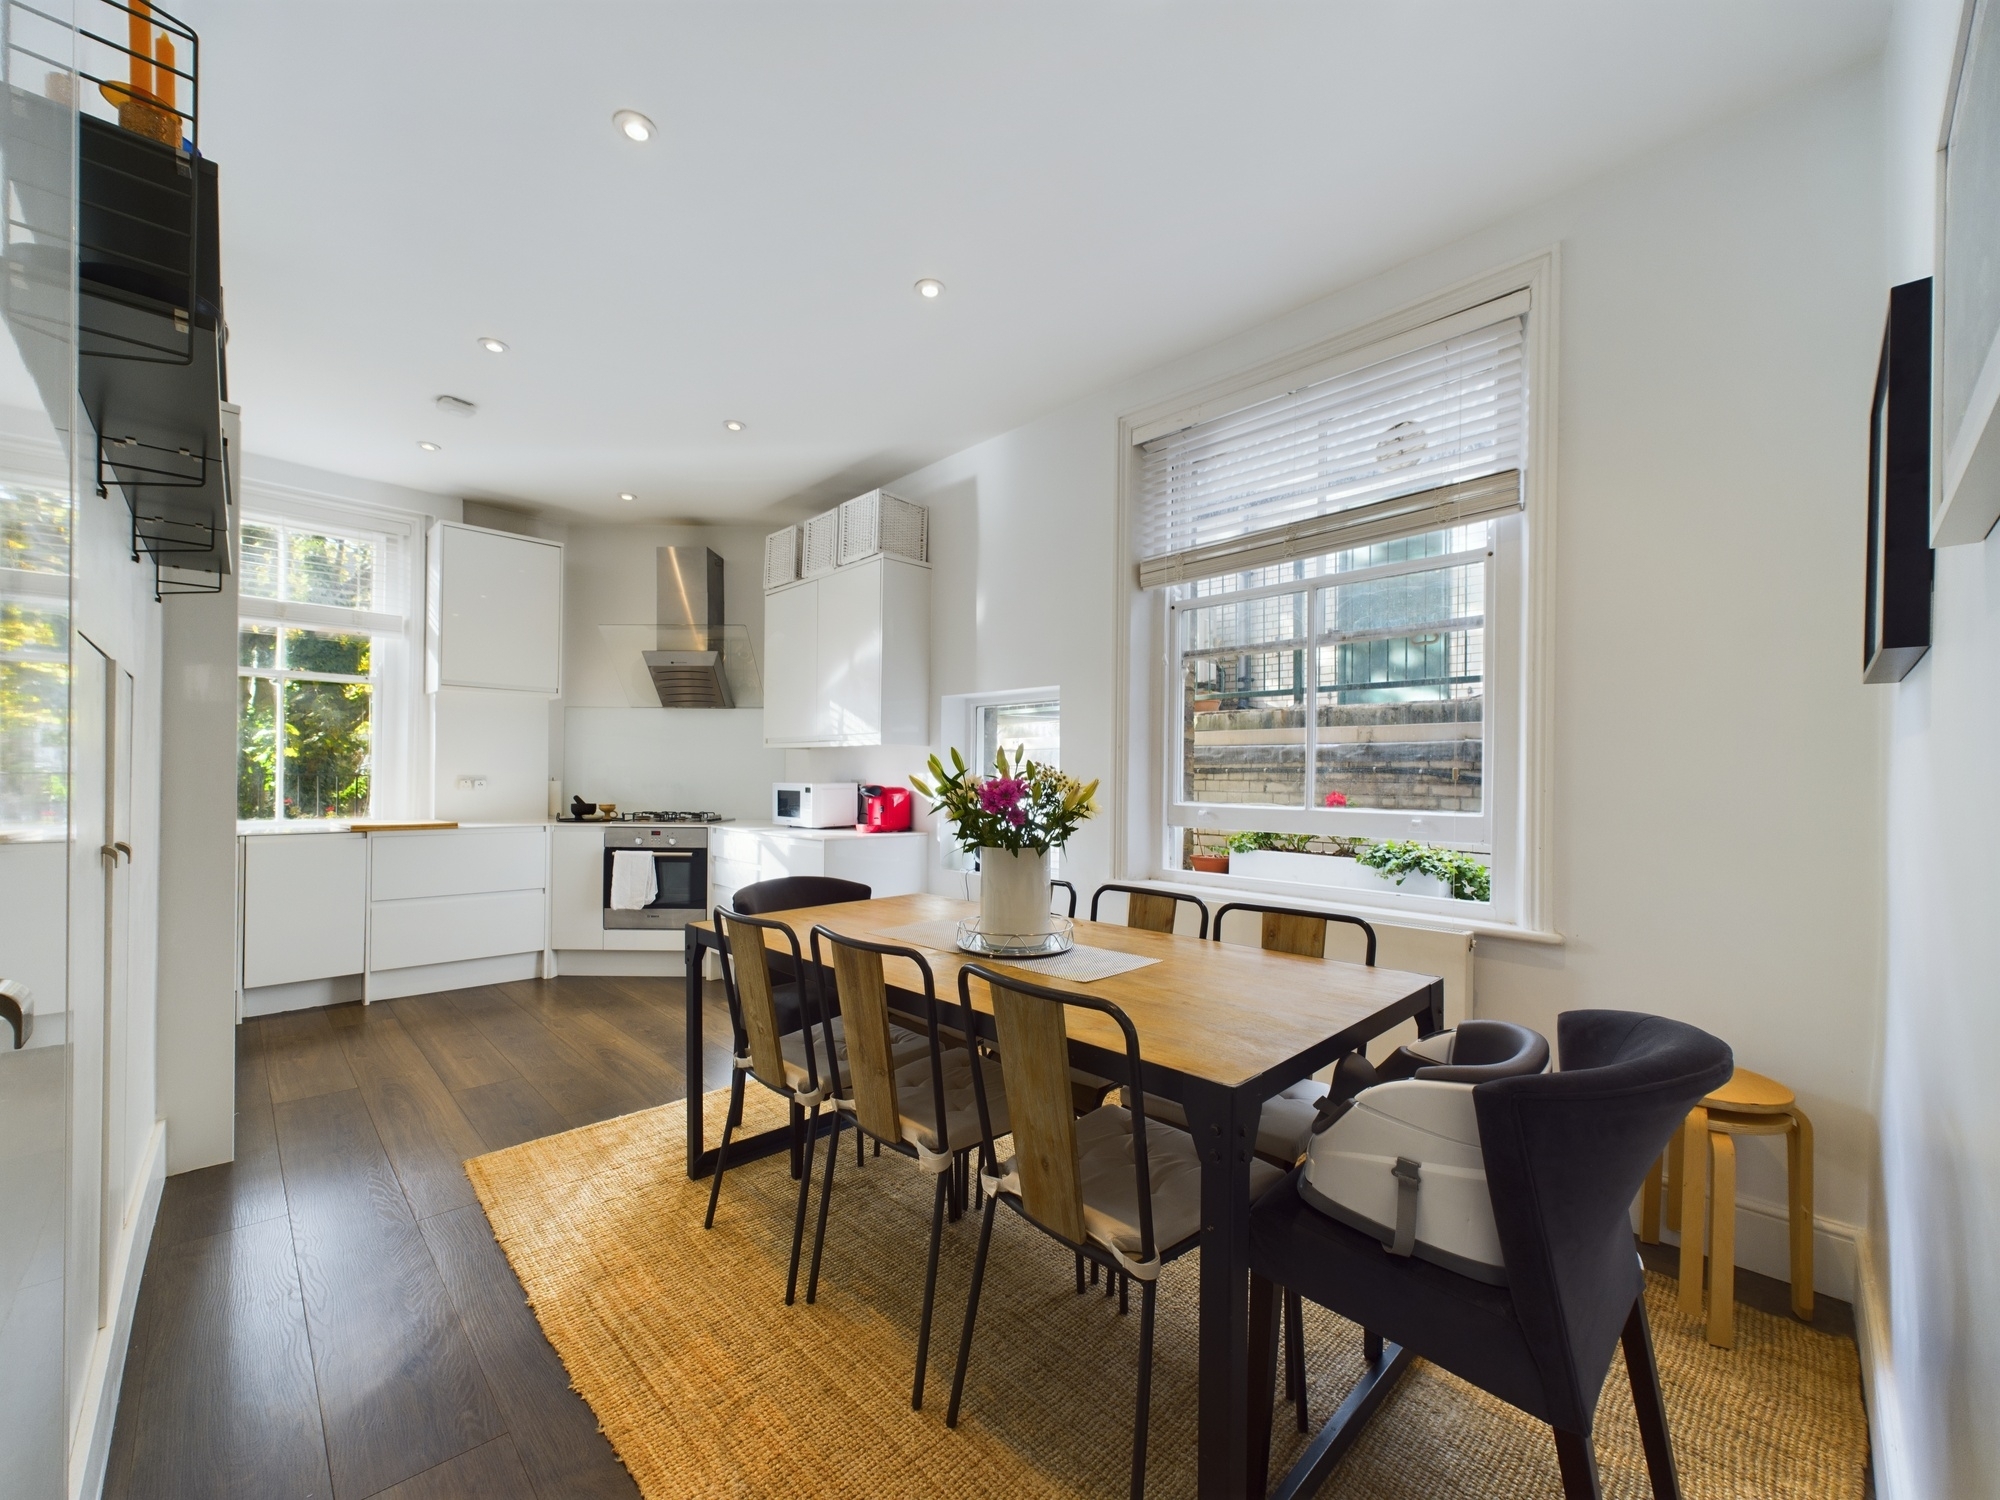 Cleveland Mansions, Widley Road, Maida Vale, London, W9 1 bedroom flat/apartment in Widley Road